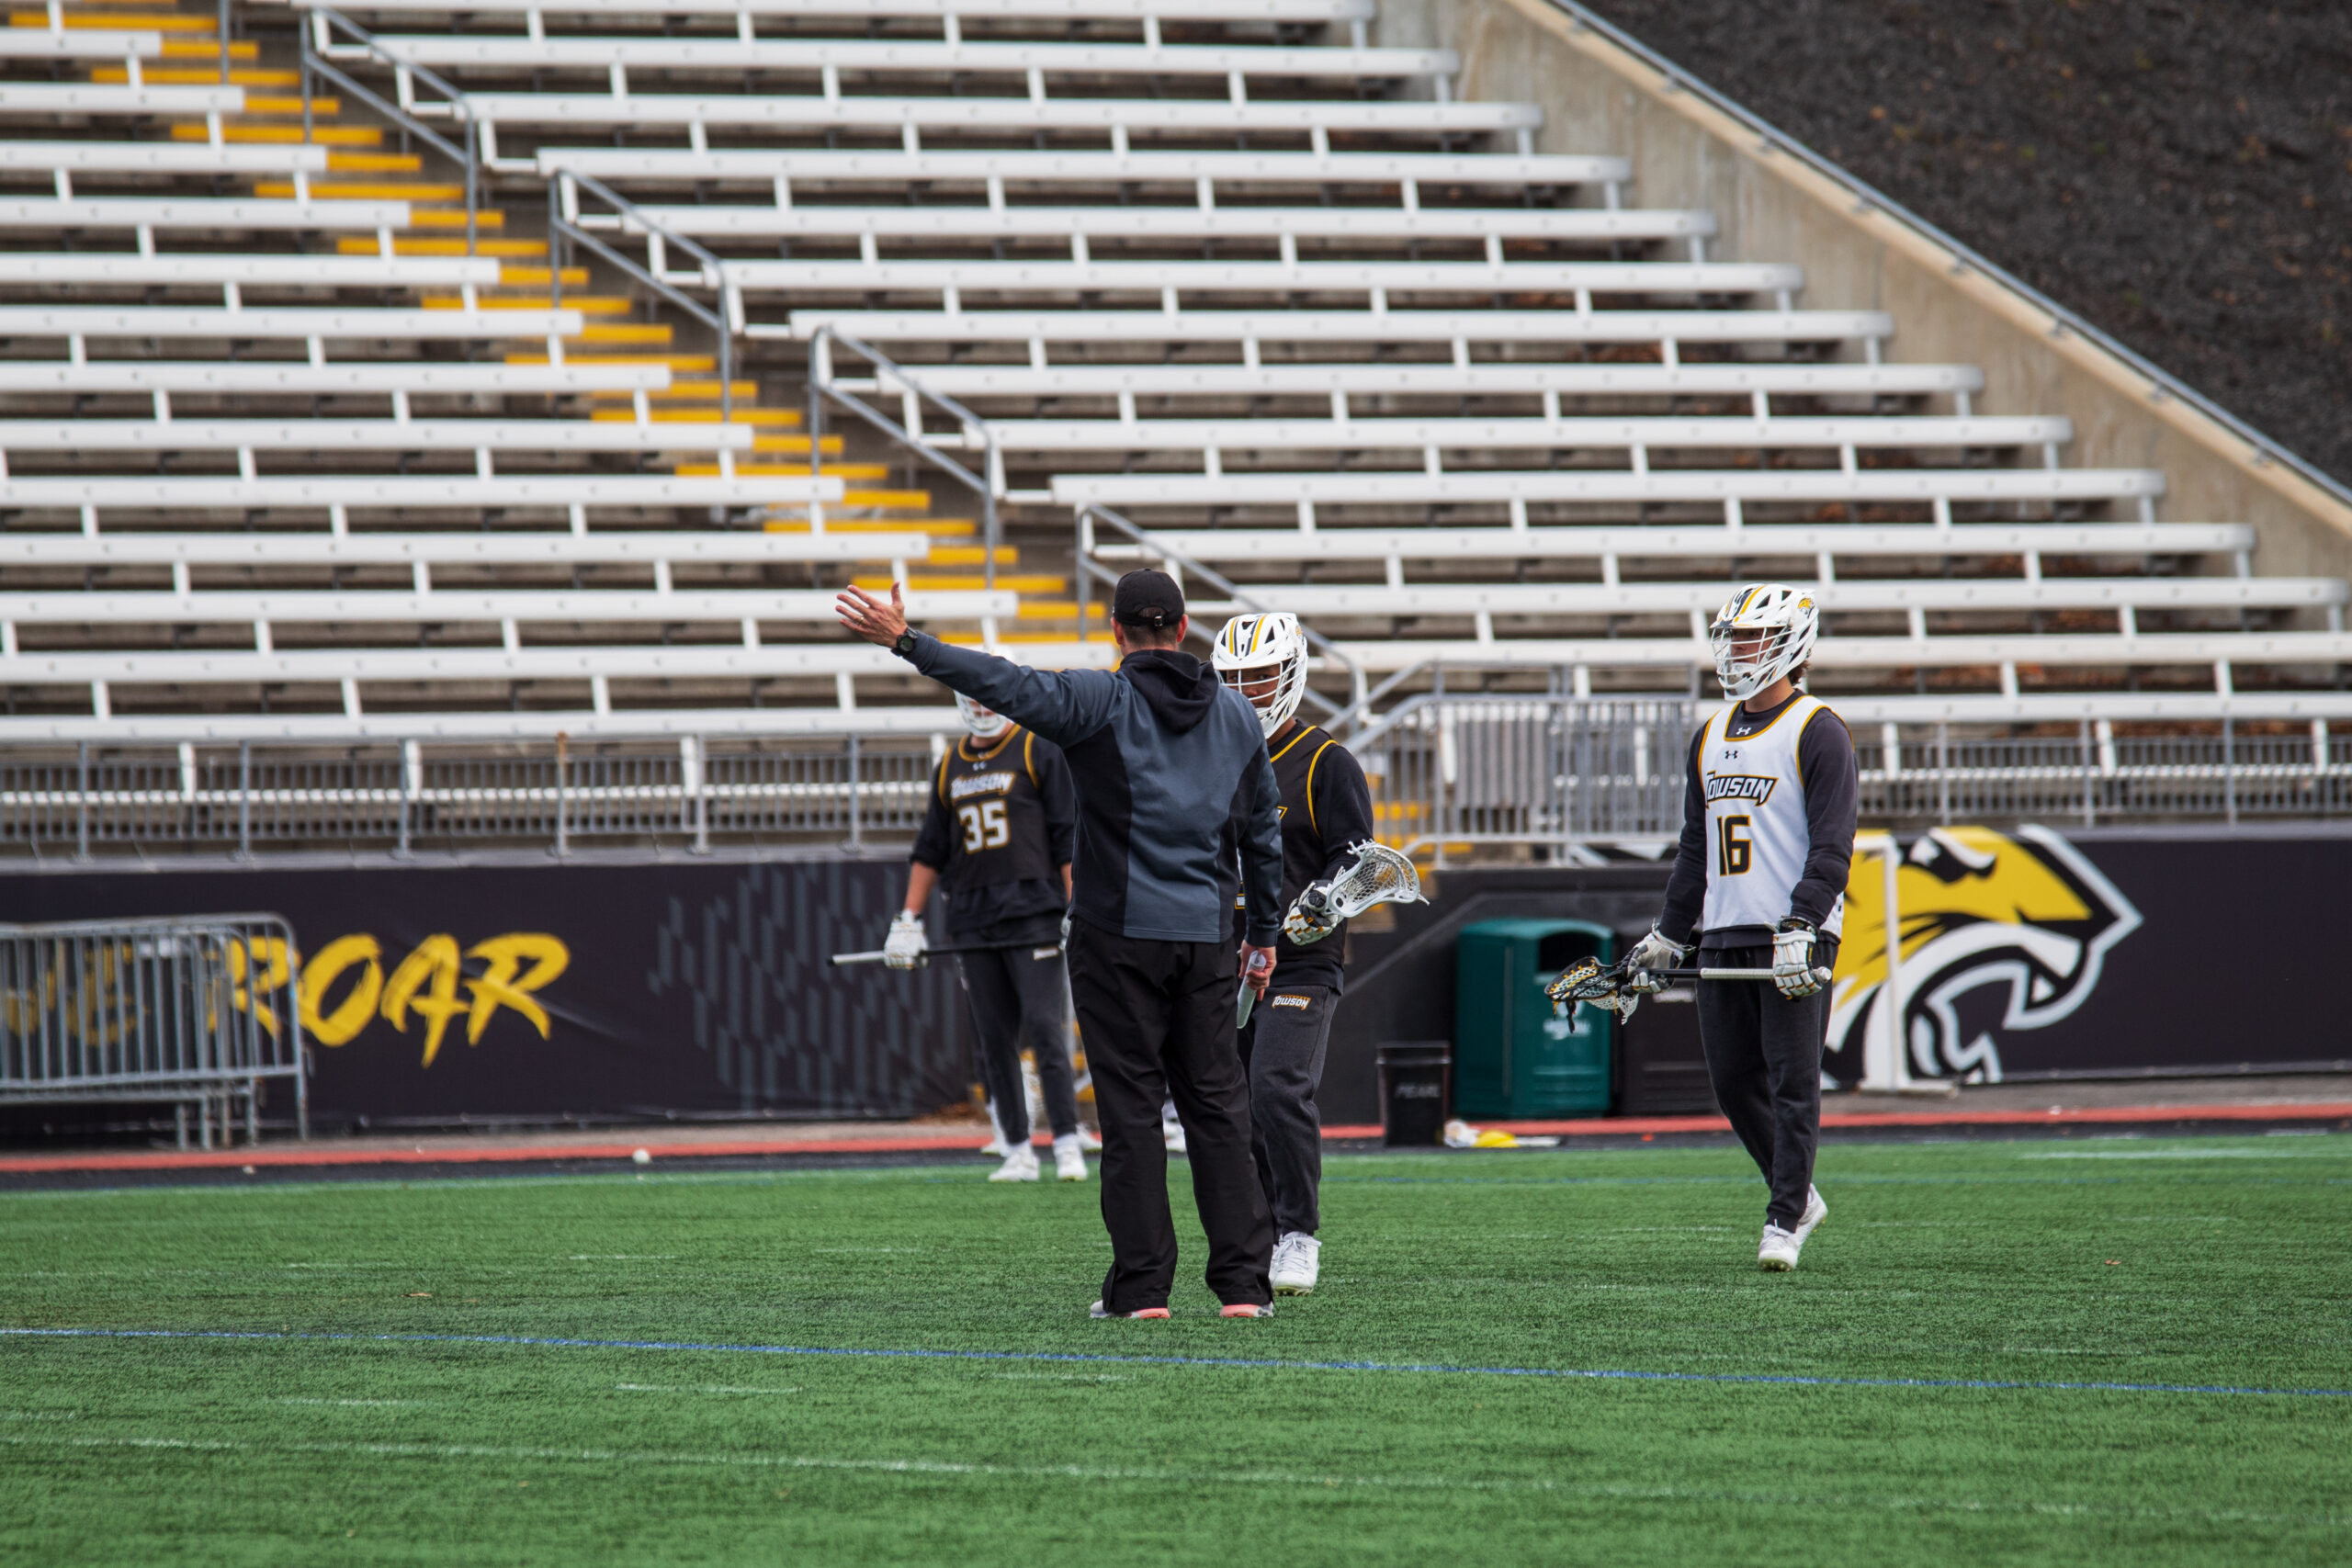 Towson Men’s Lacrosse prepares for tough home games with